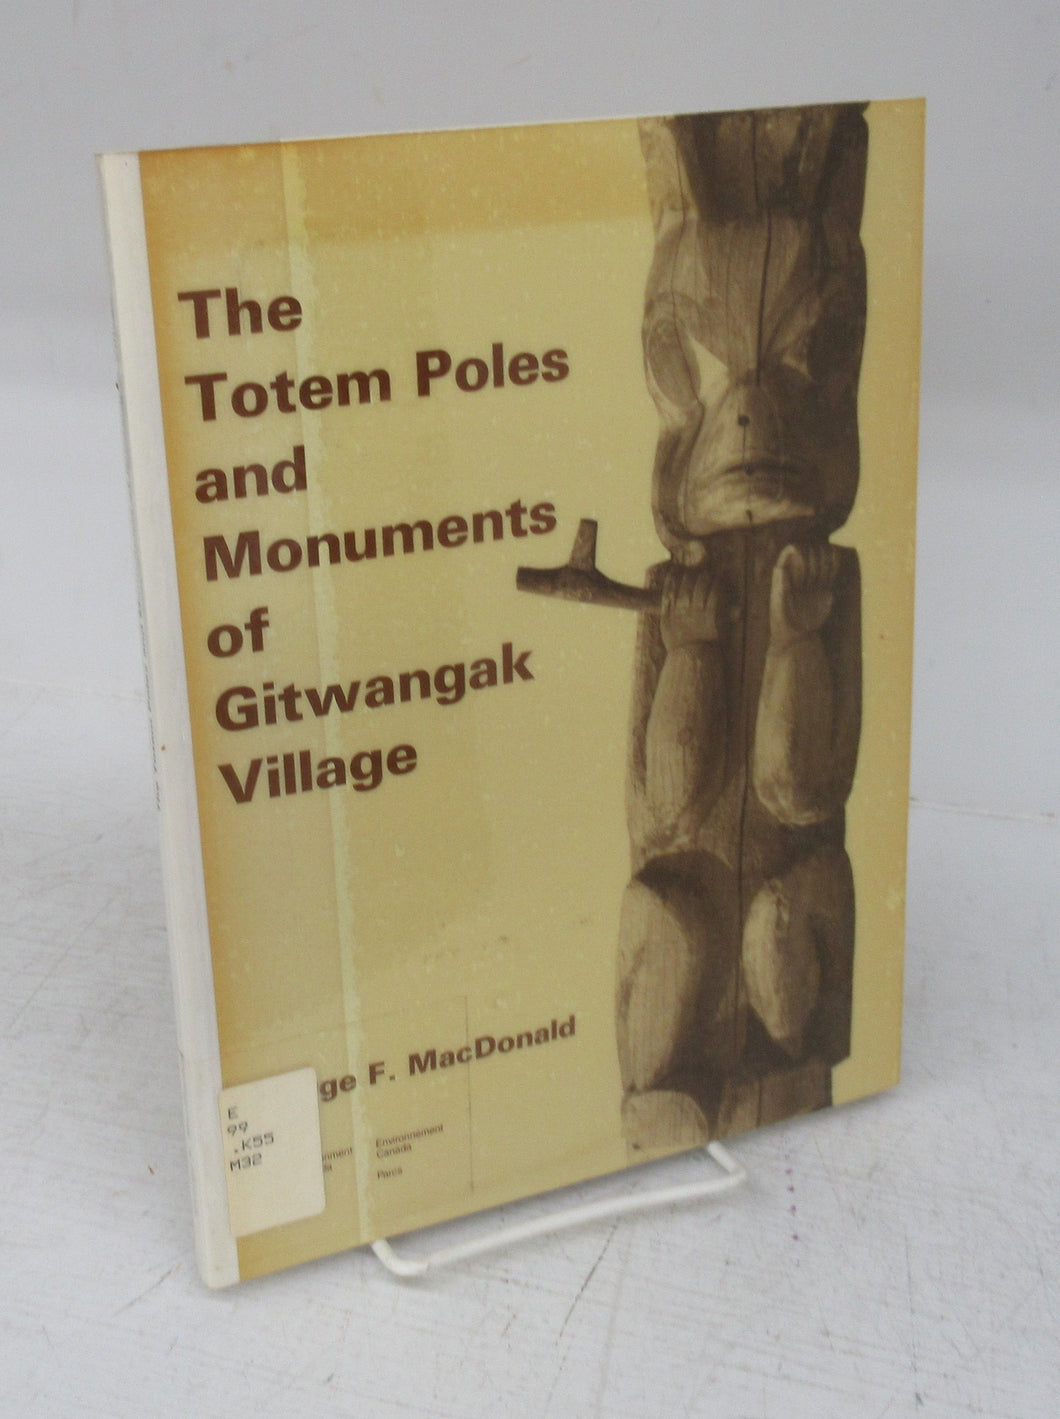 The Totem Poles and Monuments of Gitwangak Village